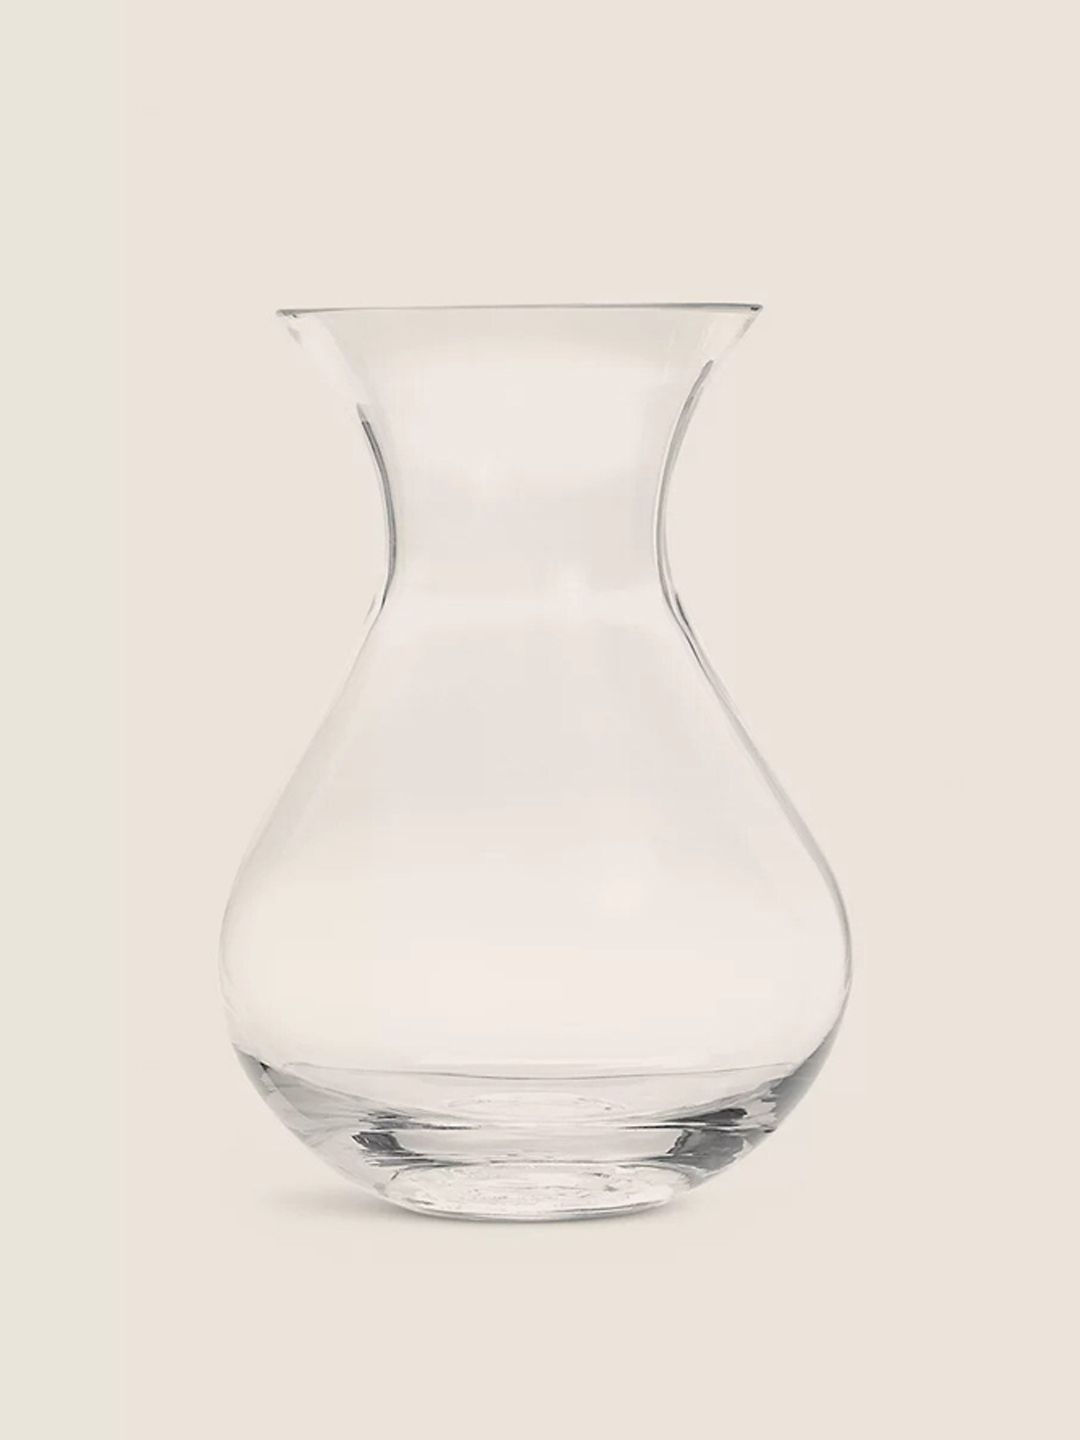 Marks & Spencer Transparent Solid Glass Vases Price in India